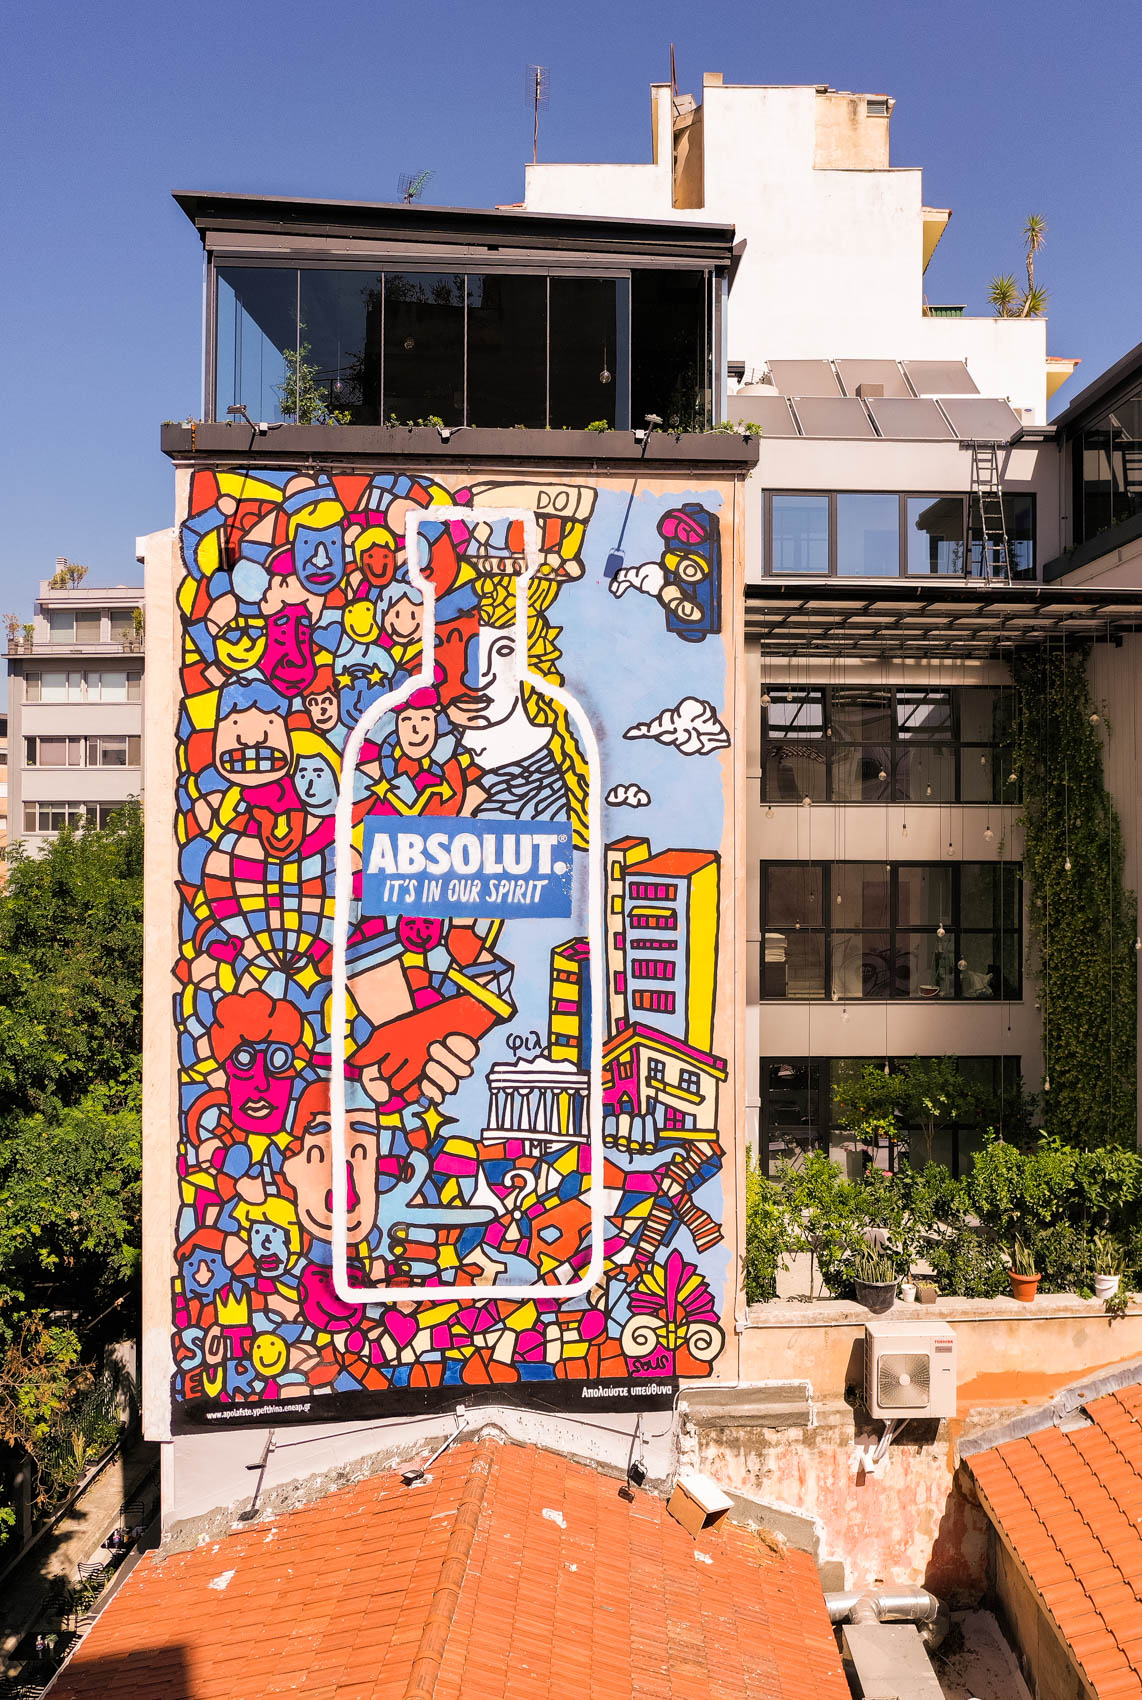 The Absolut Mural